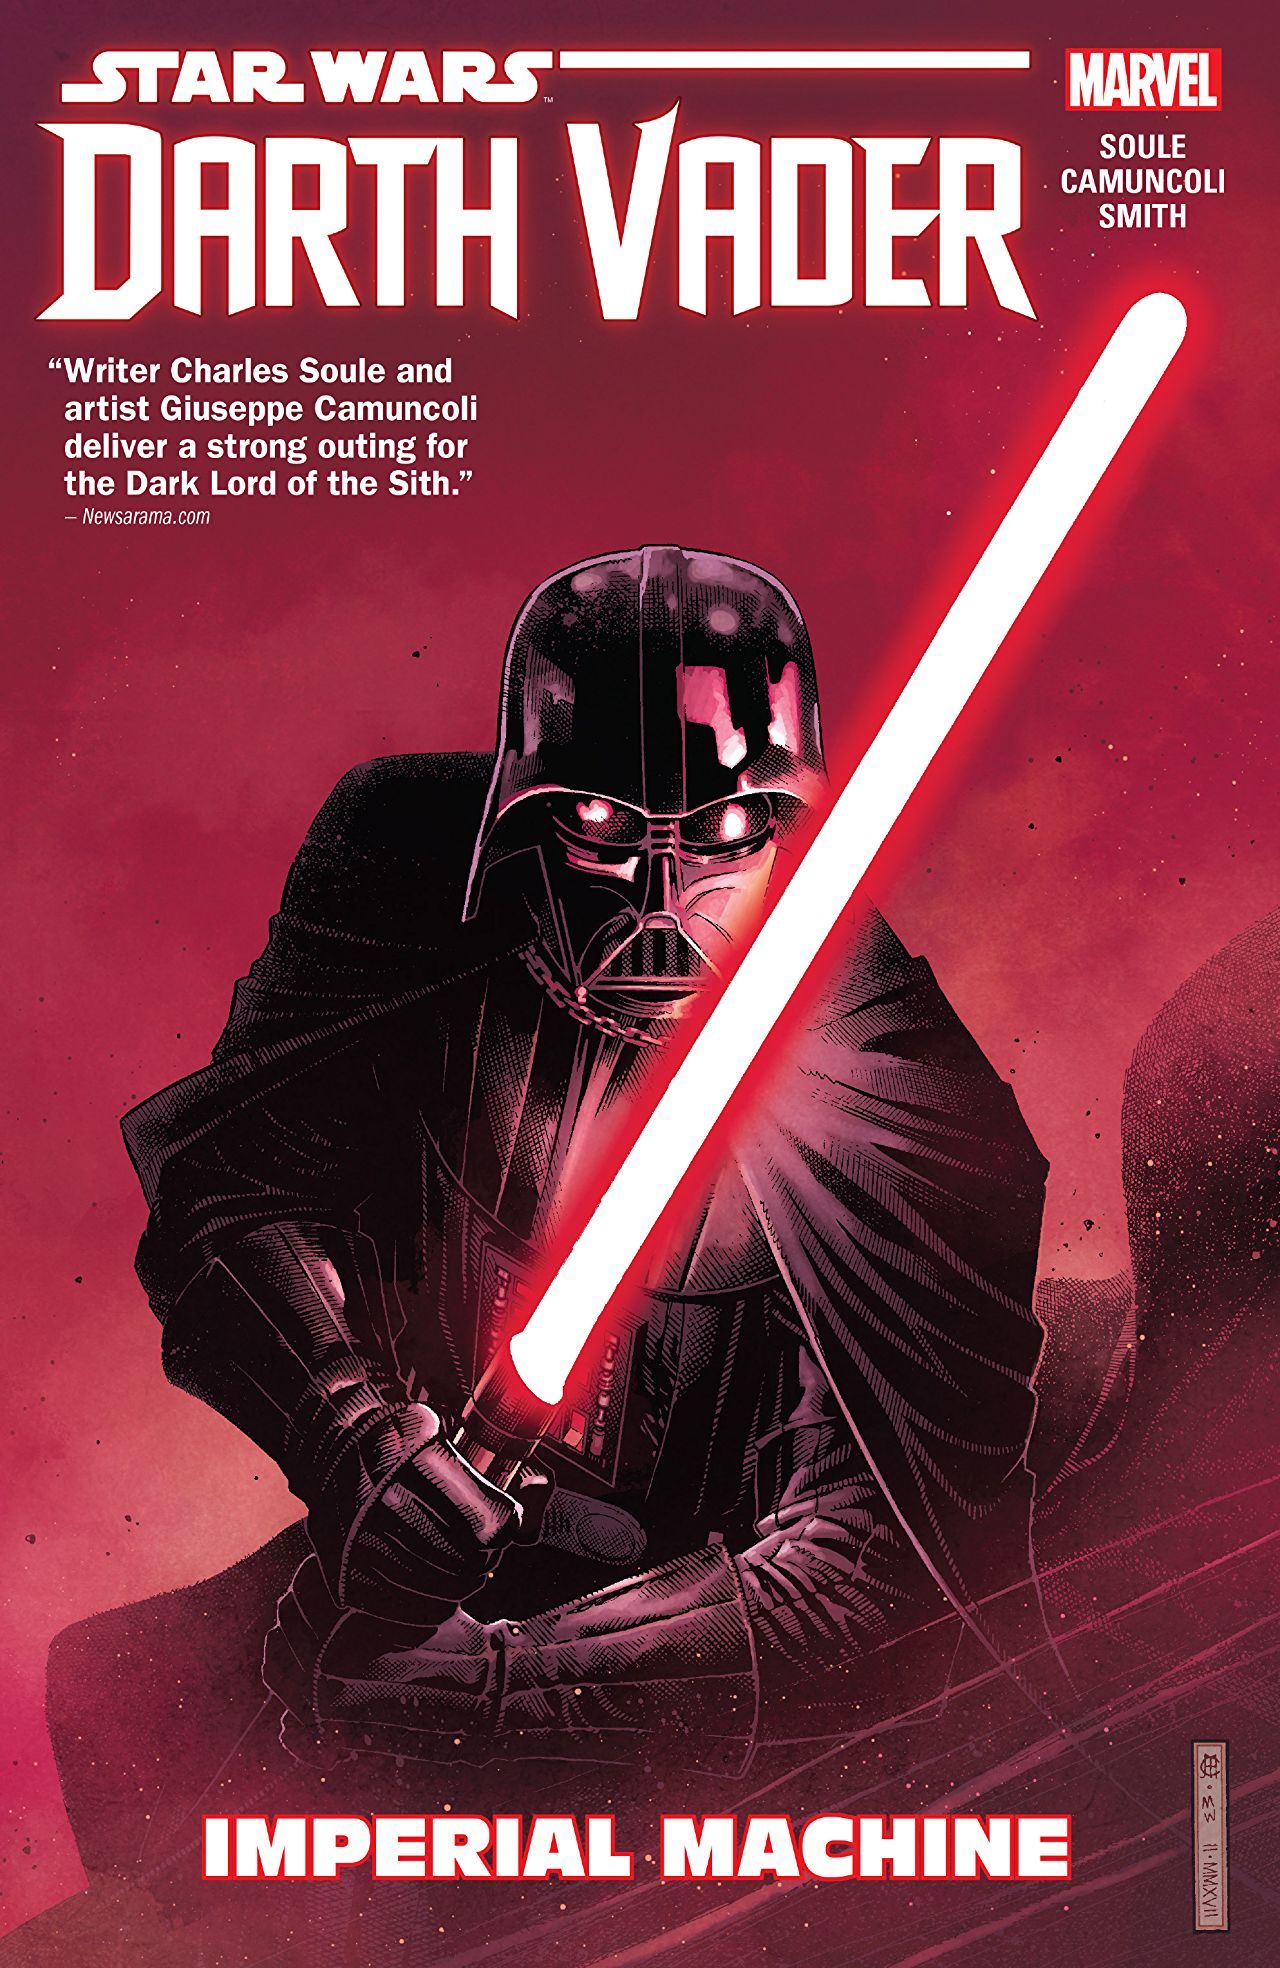 Star Wars: Darth Vader - Dark Lord of the Sith, Vol. 1: Imperial Machine by Charles Soule